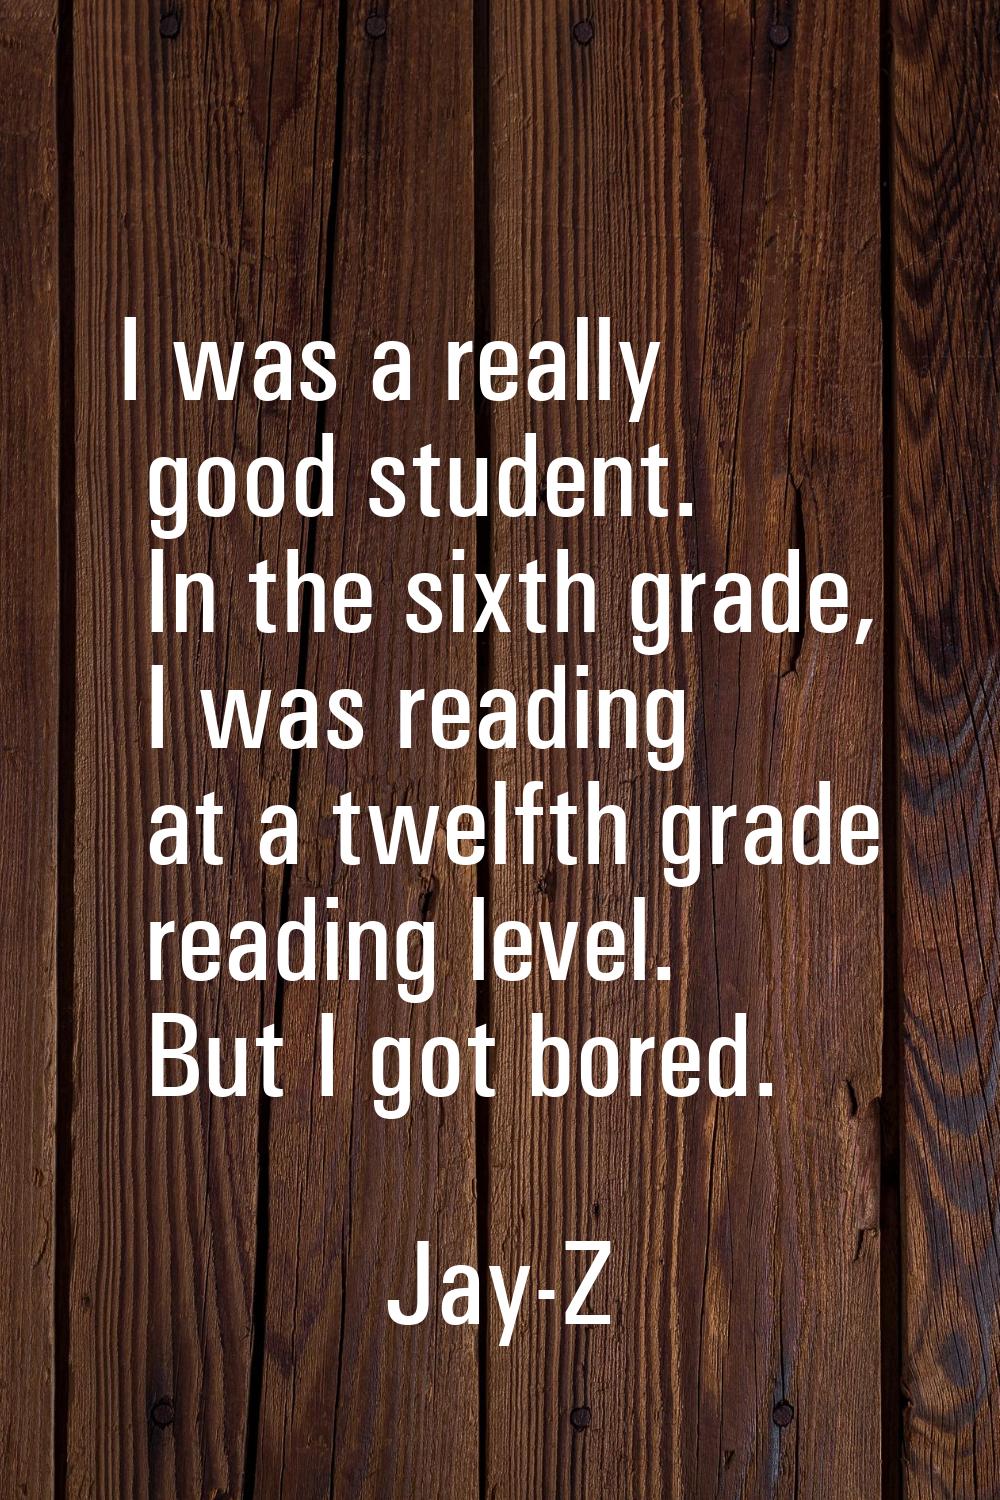 I was a really good student. In the sixth grade, I was reading at a twelfth grade reading level. Bu